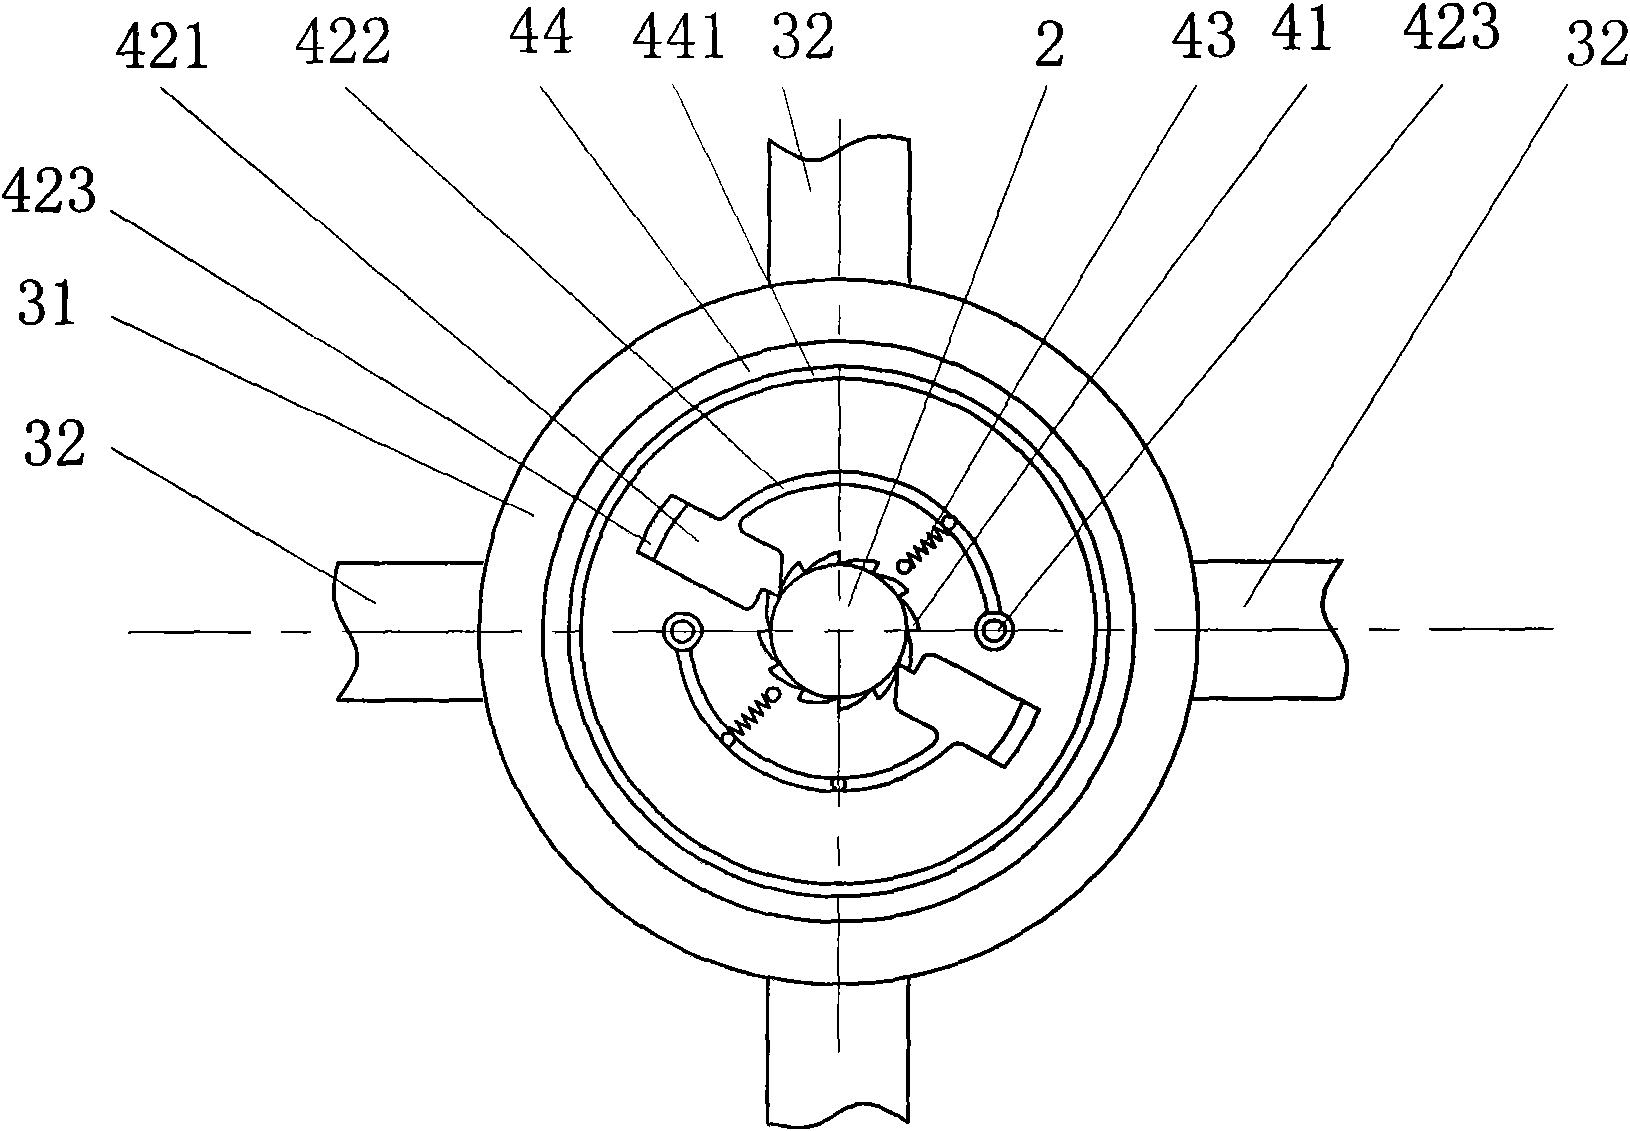 Multi-stage impeller wind-driven generator